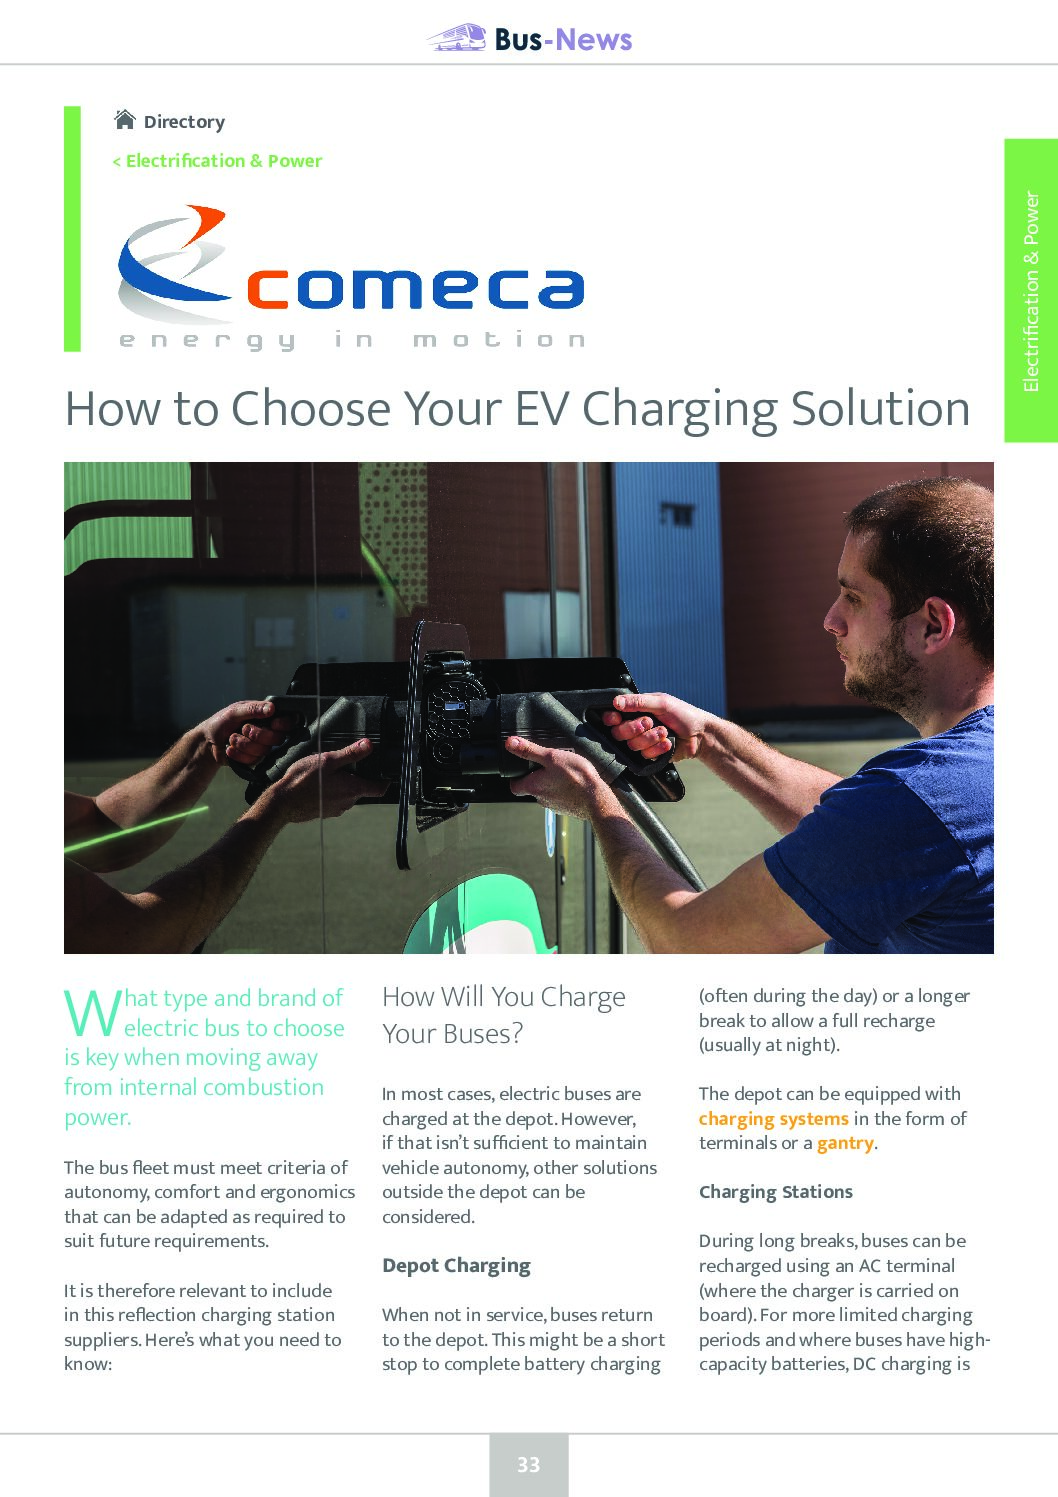 How to Choose Your EV Charging Solution